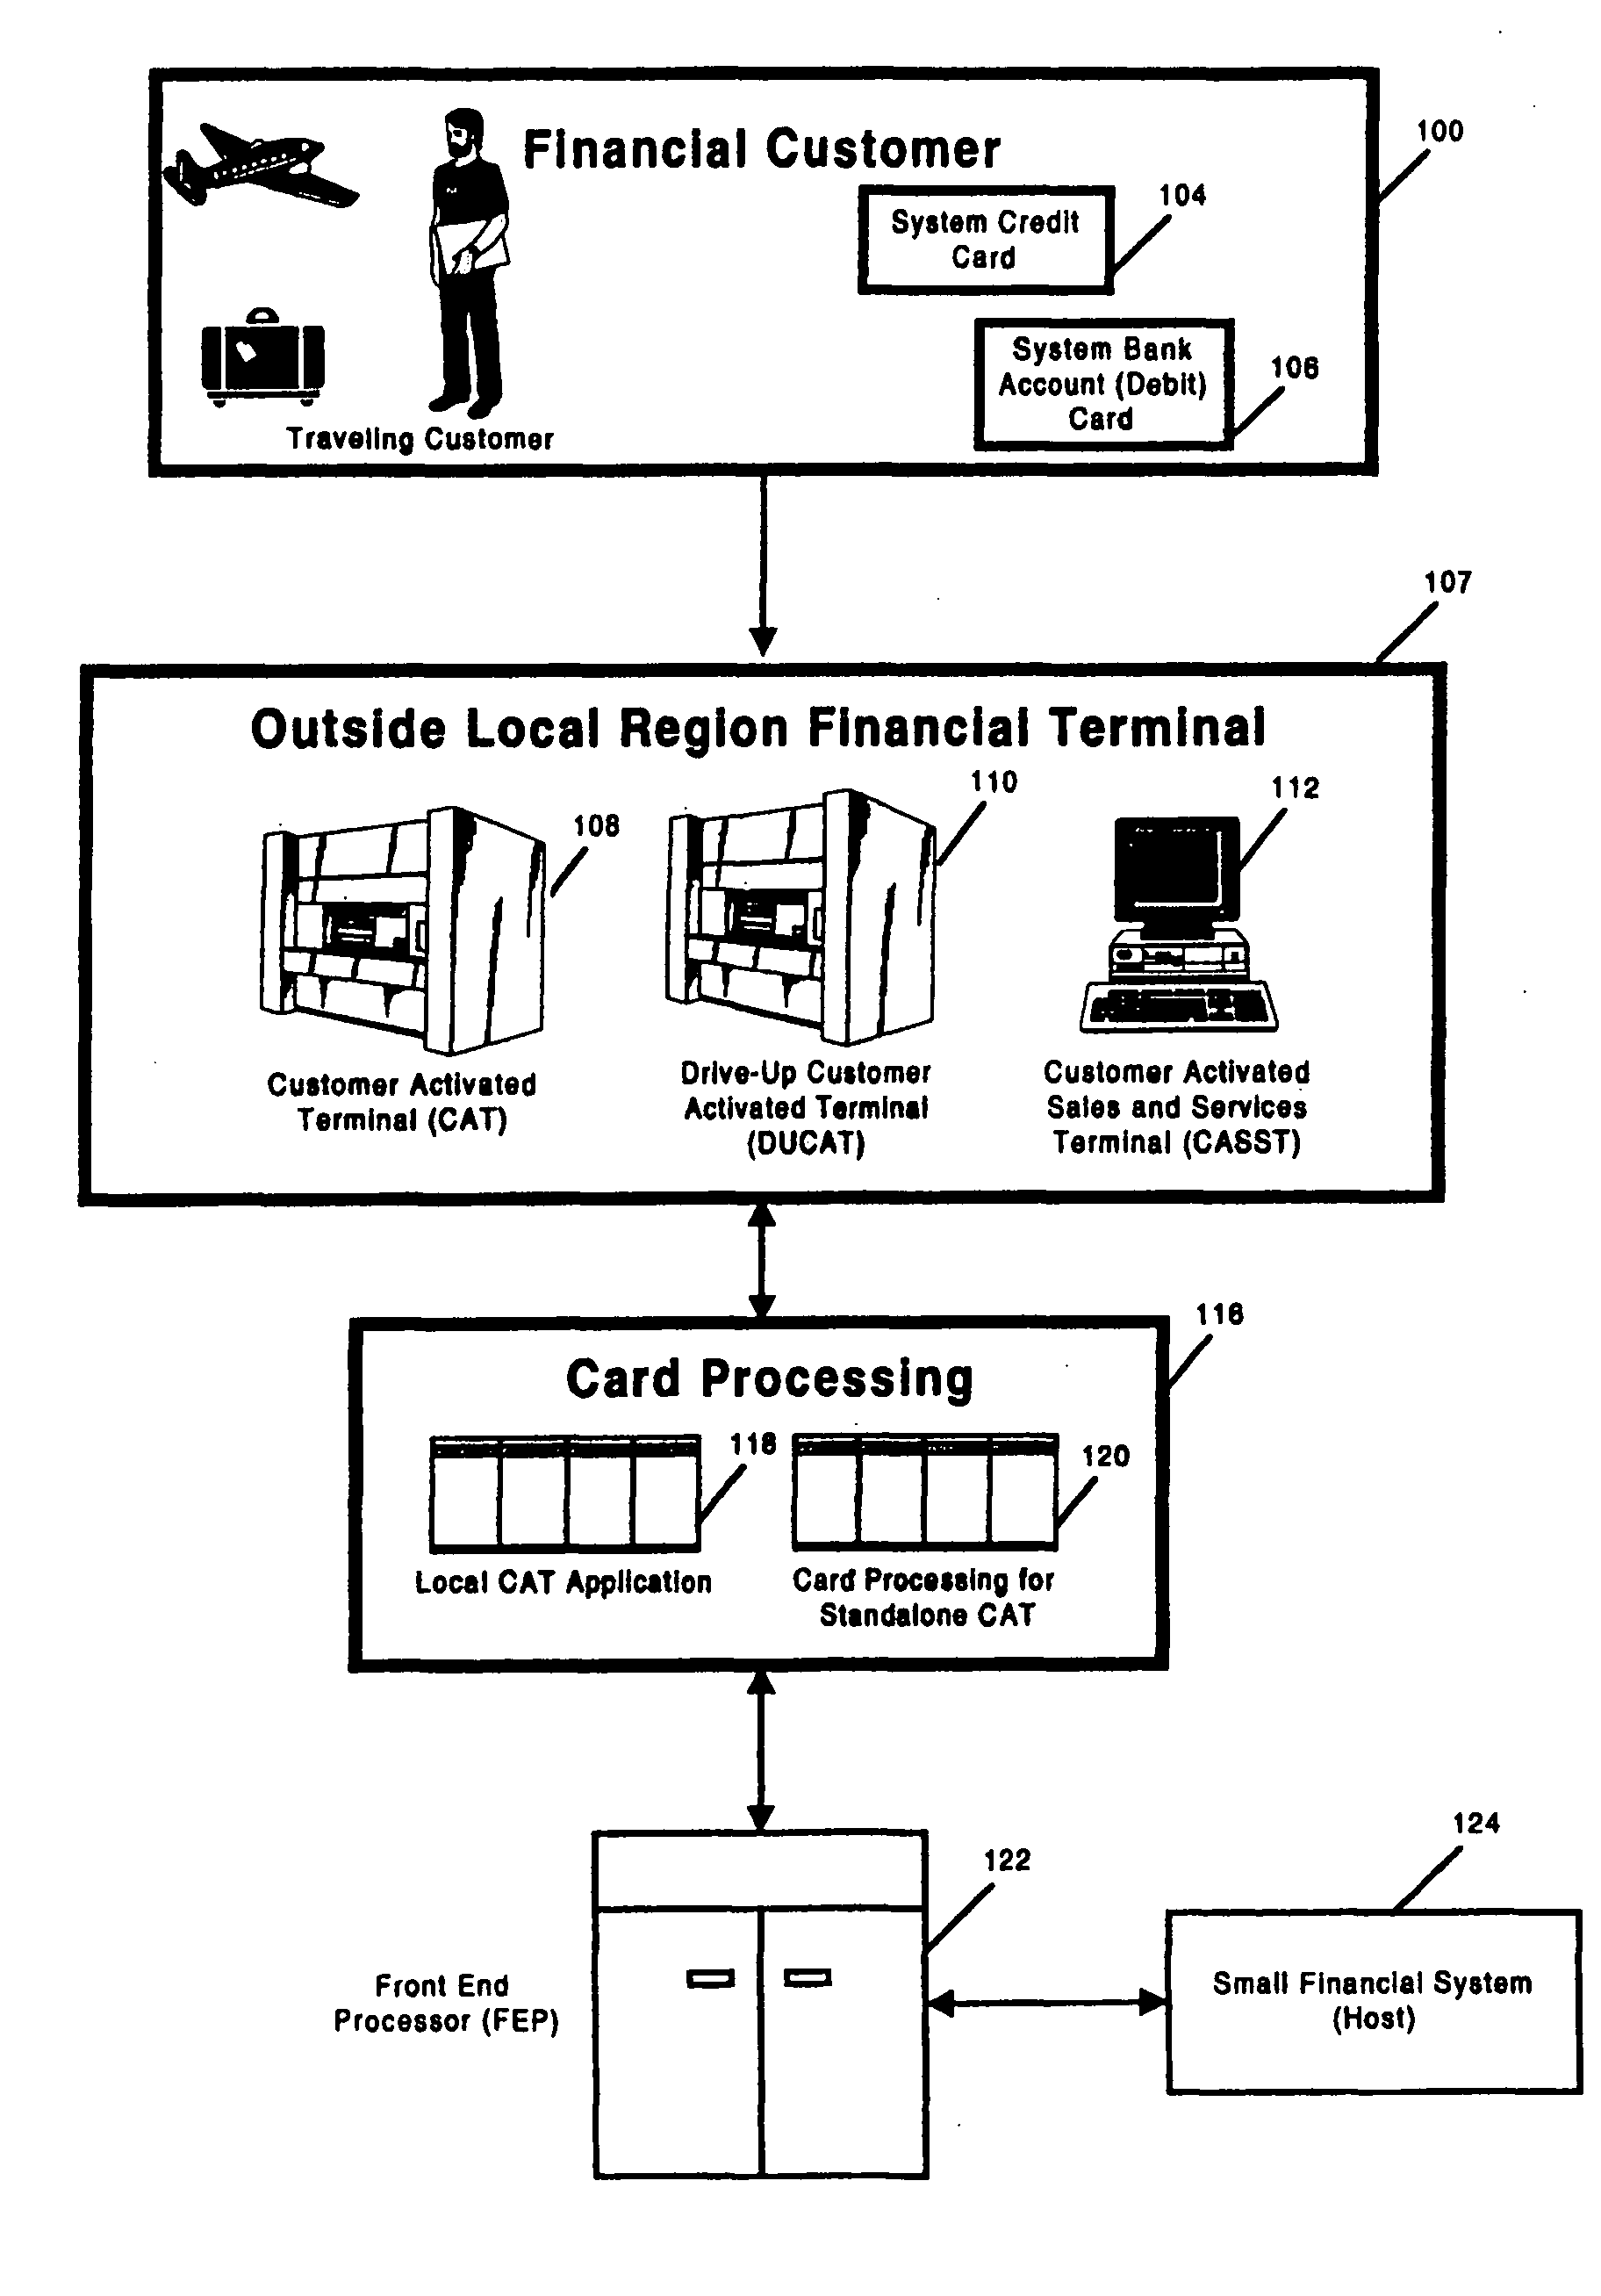 Global method and system for providing enhanced transactional functionality through a customer terminal